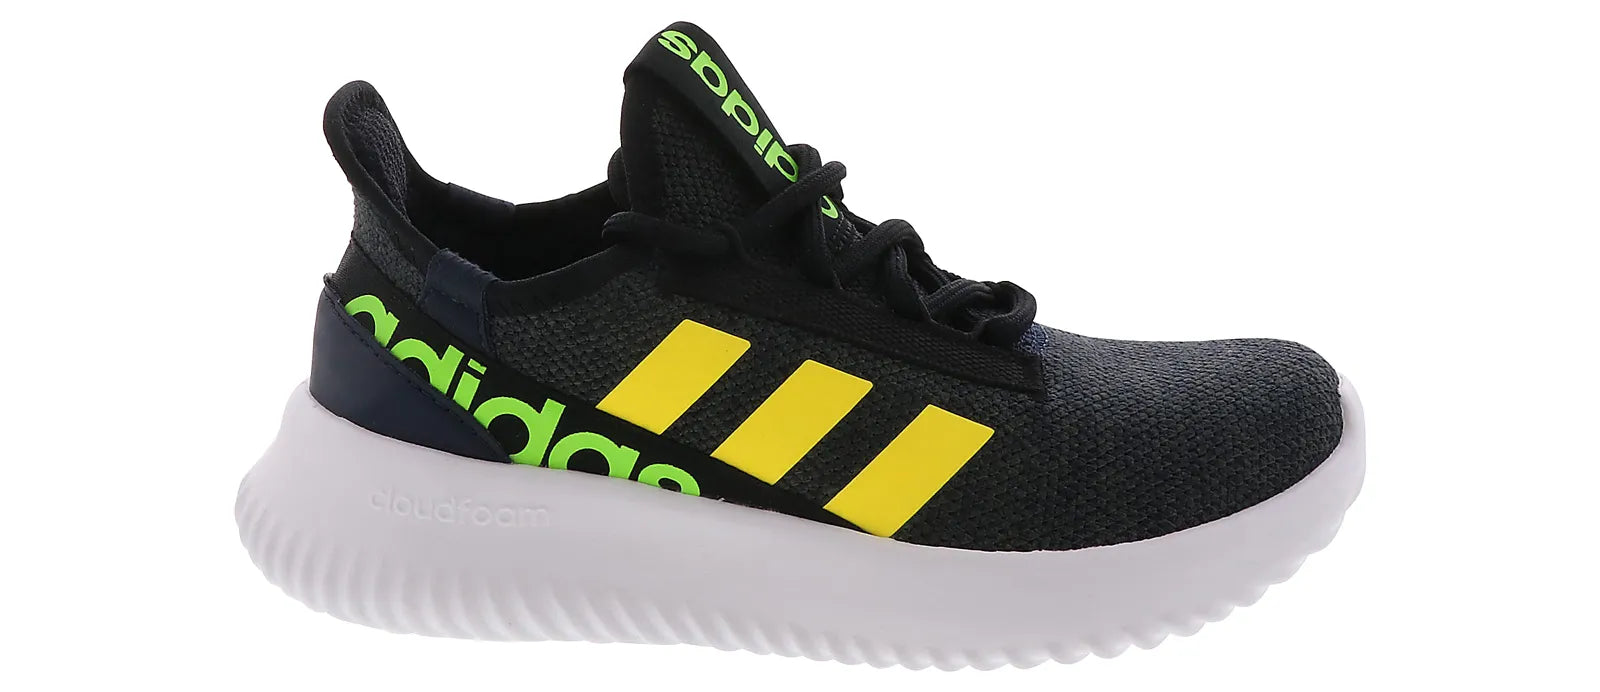 Lateral view of the Kids' Kaptir 2.0 by Adidas in the color Legend Ink / Beam Yellow / Solar Green